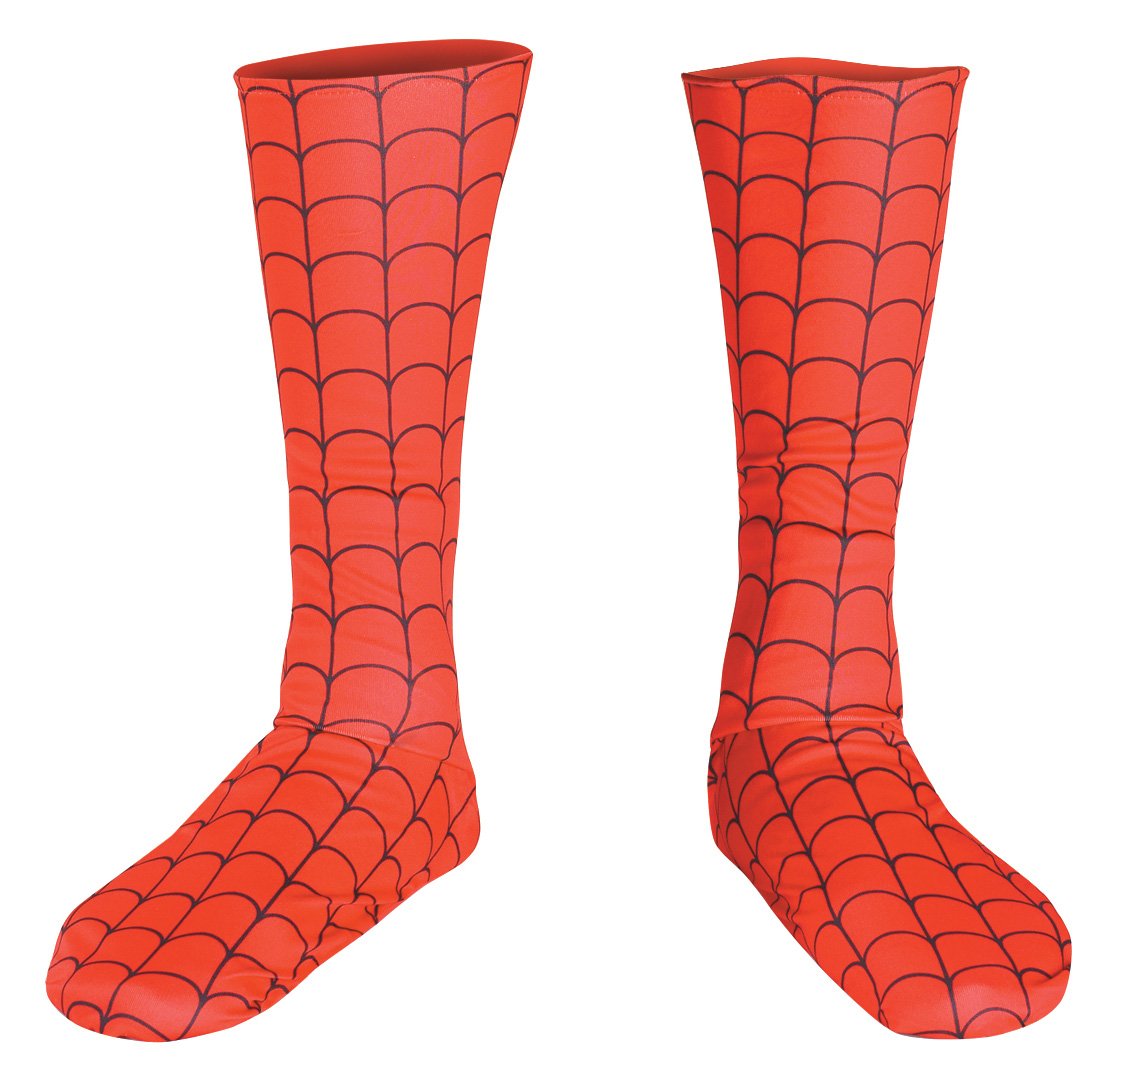 Spider-Man Adult Boot Covers